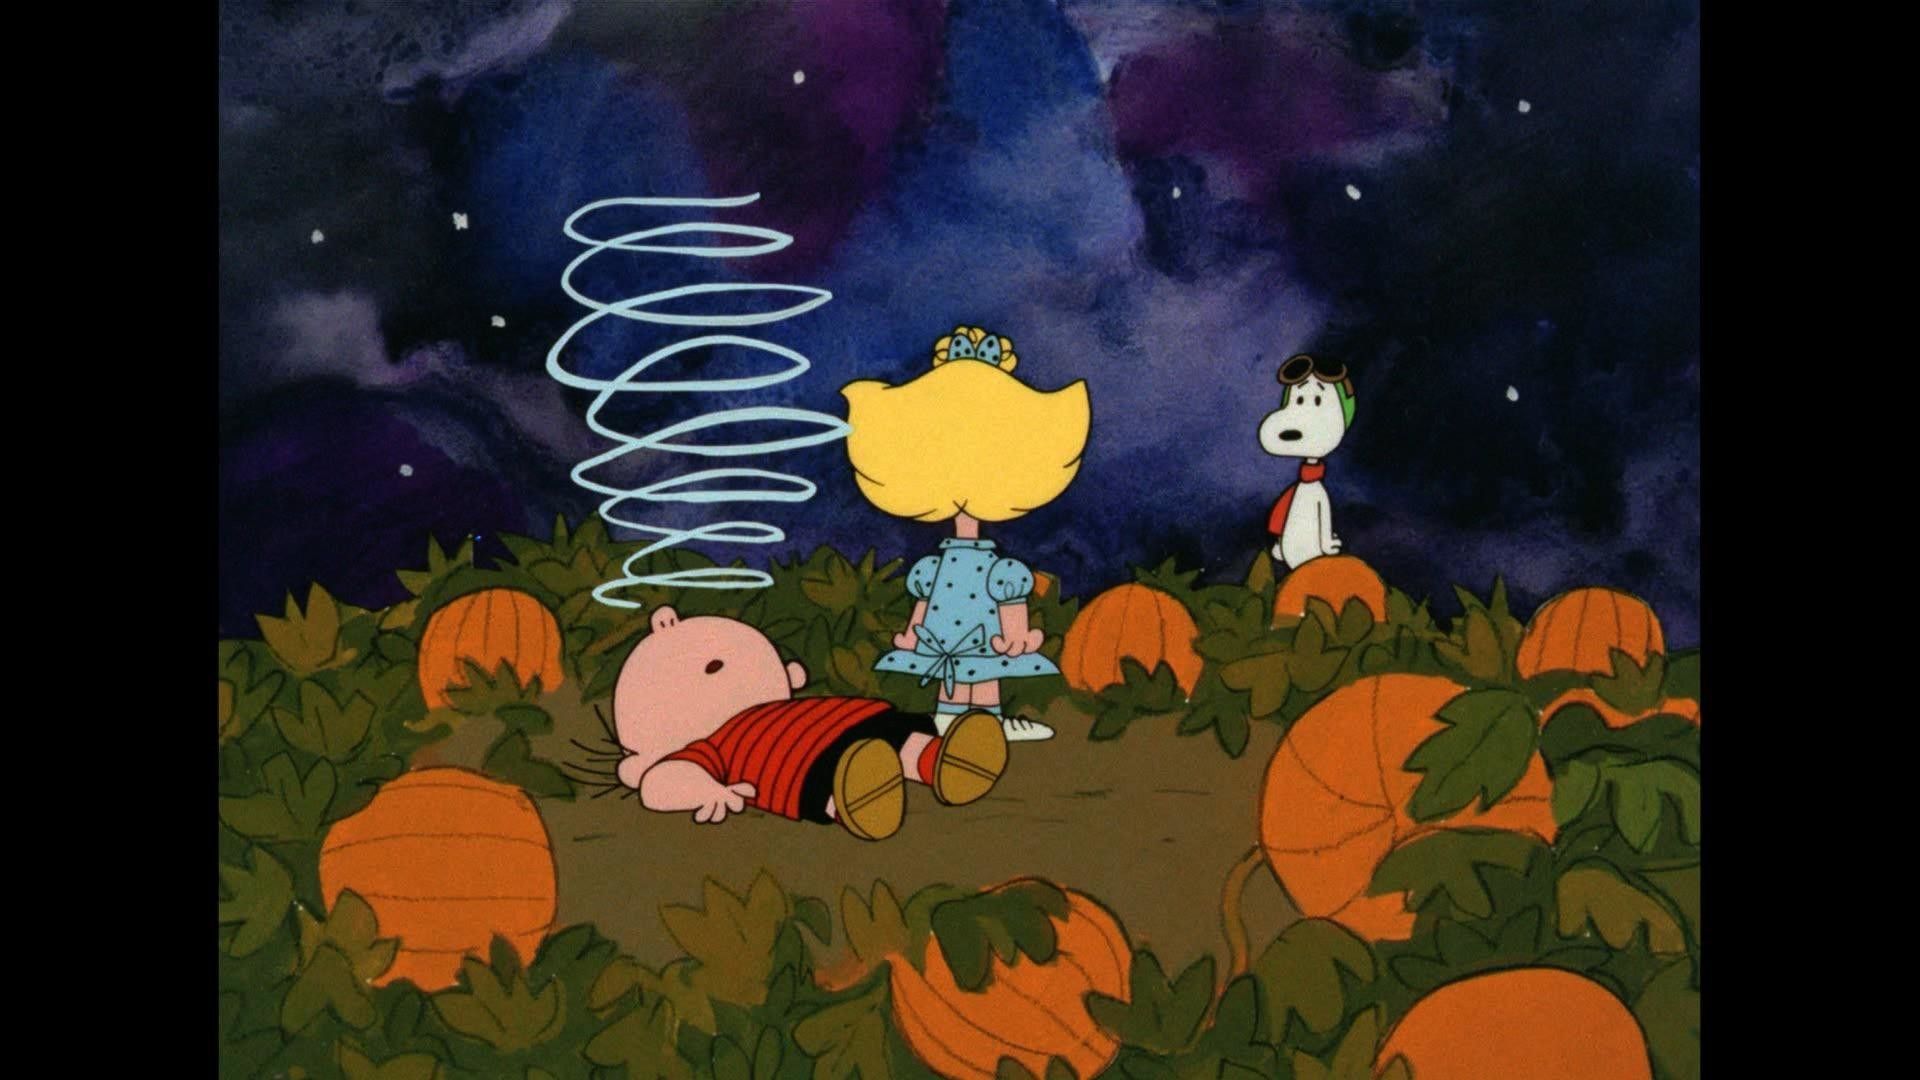 A cartoon character is standing in front of some pumpkins - Charlie Brown, Snoopy